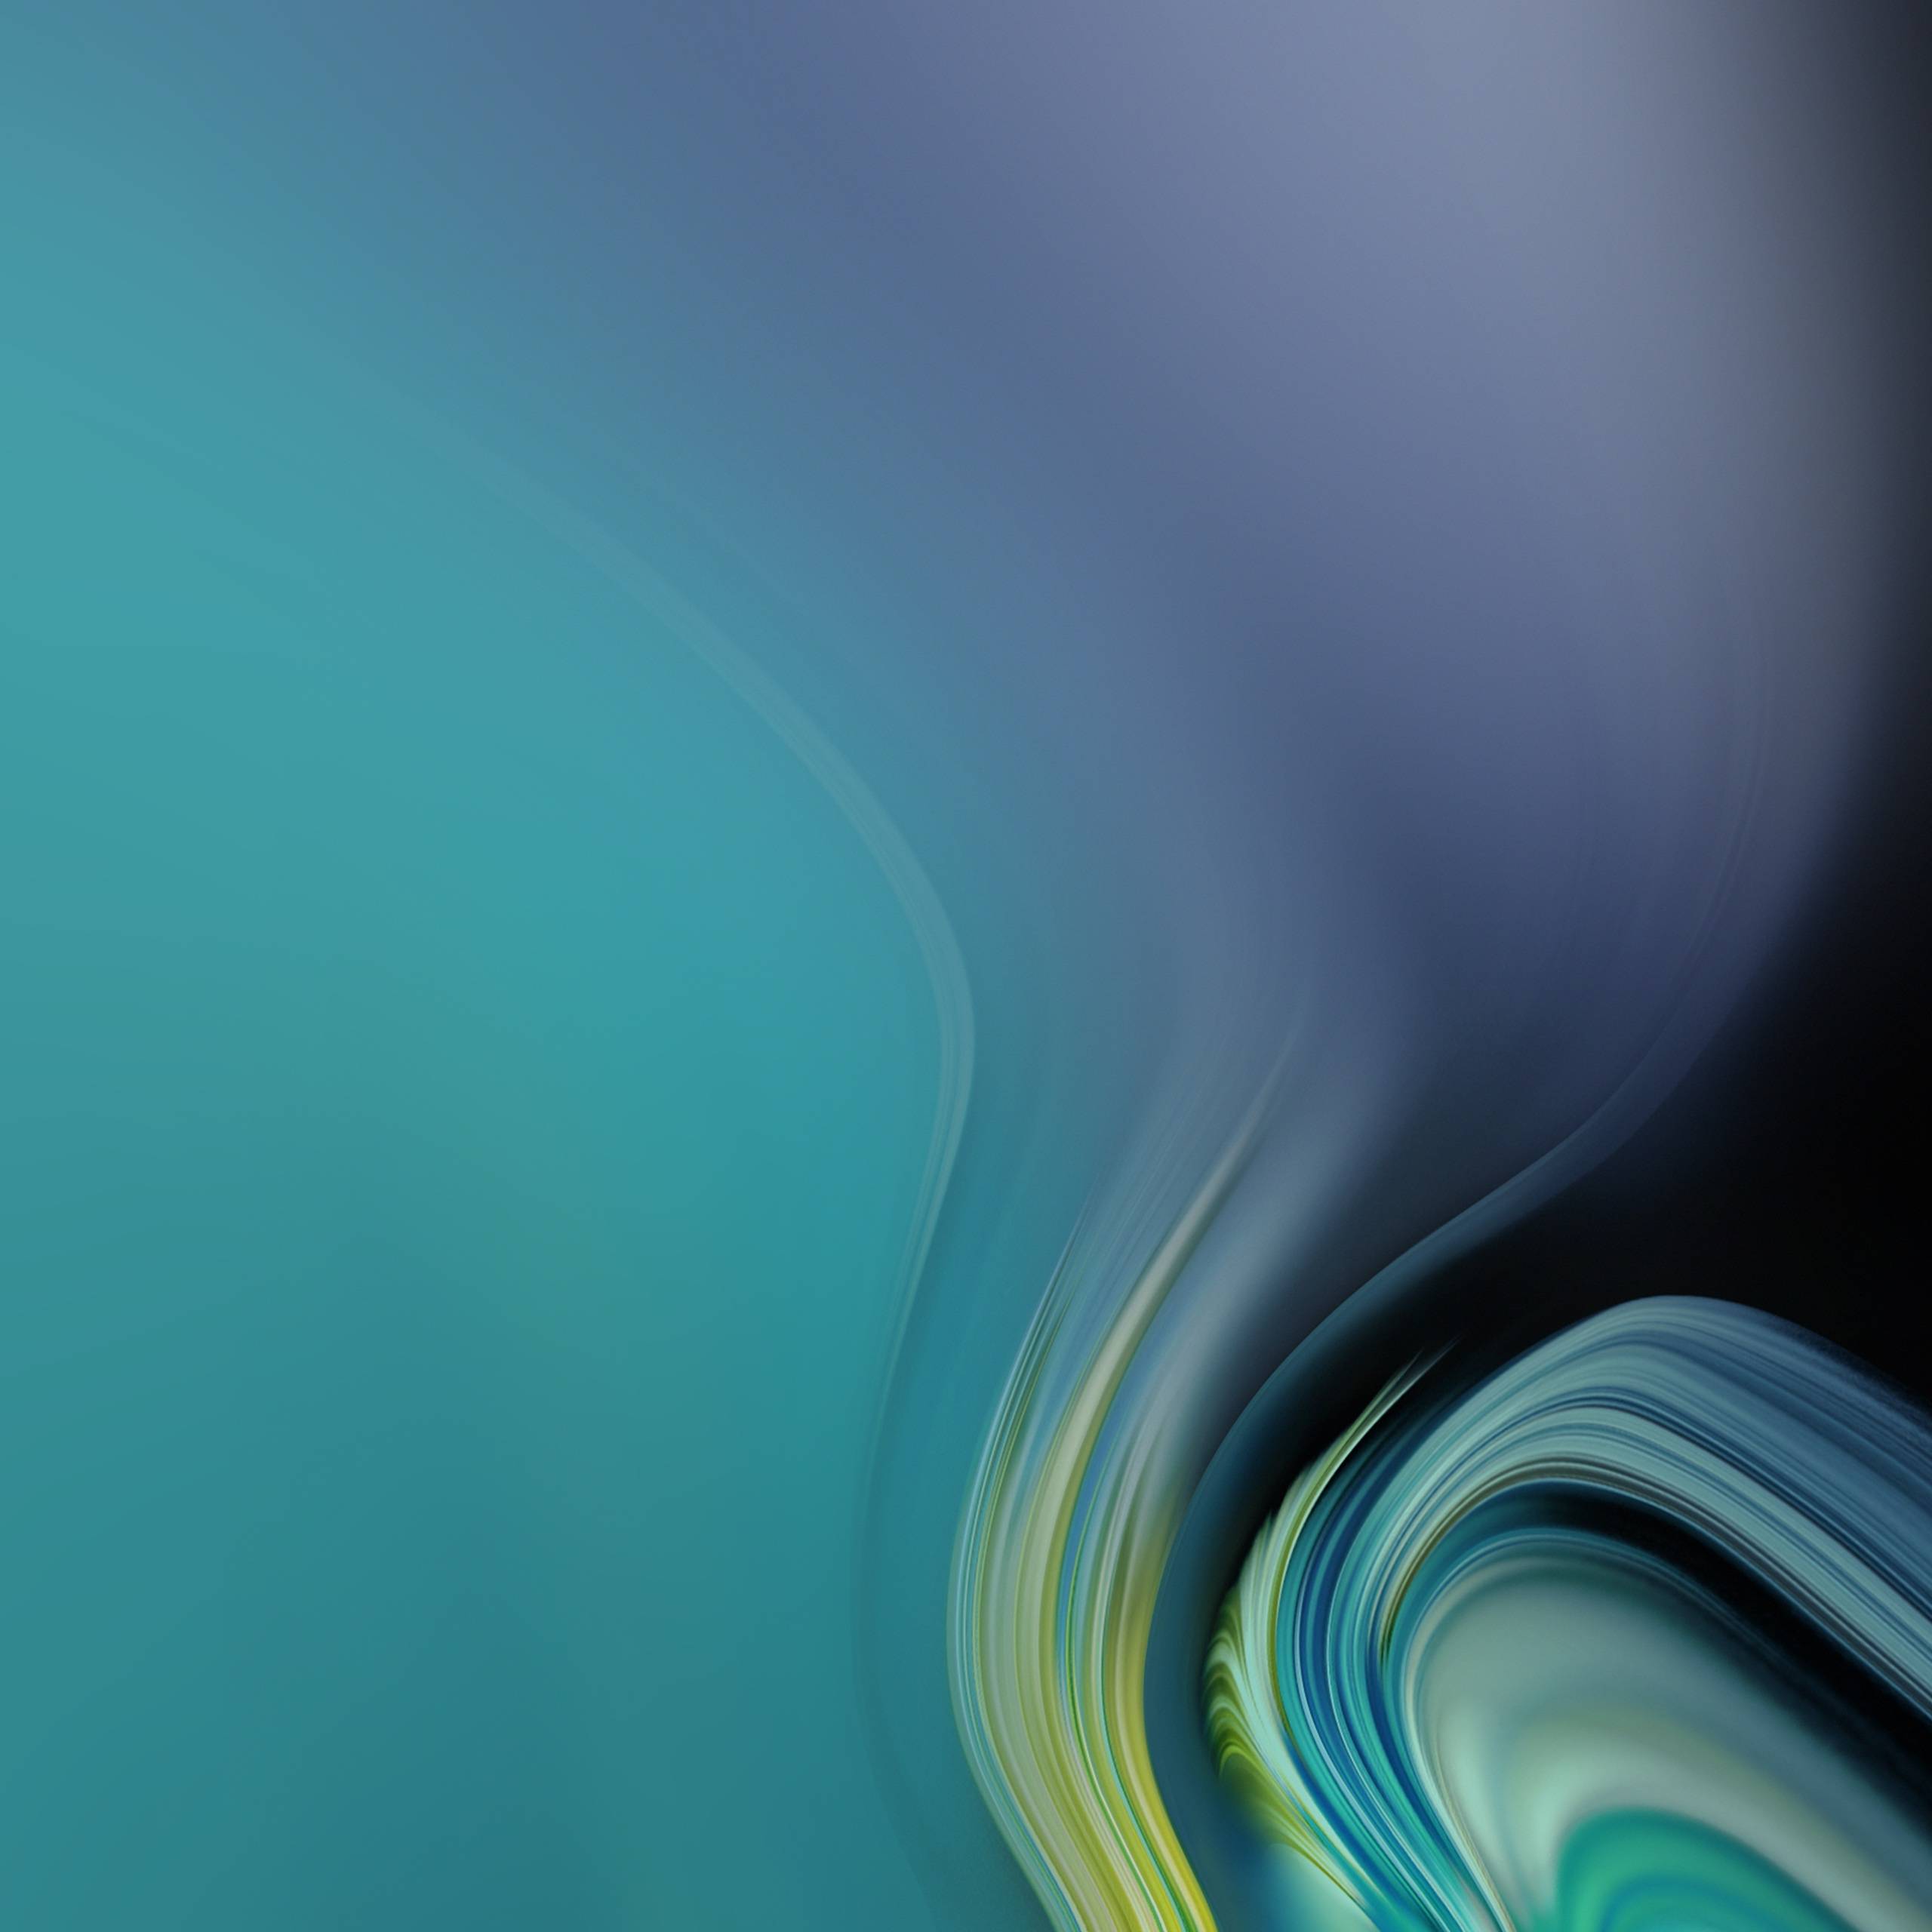 Note 9 Wallpapers